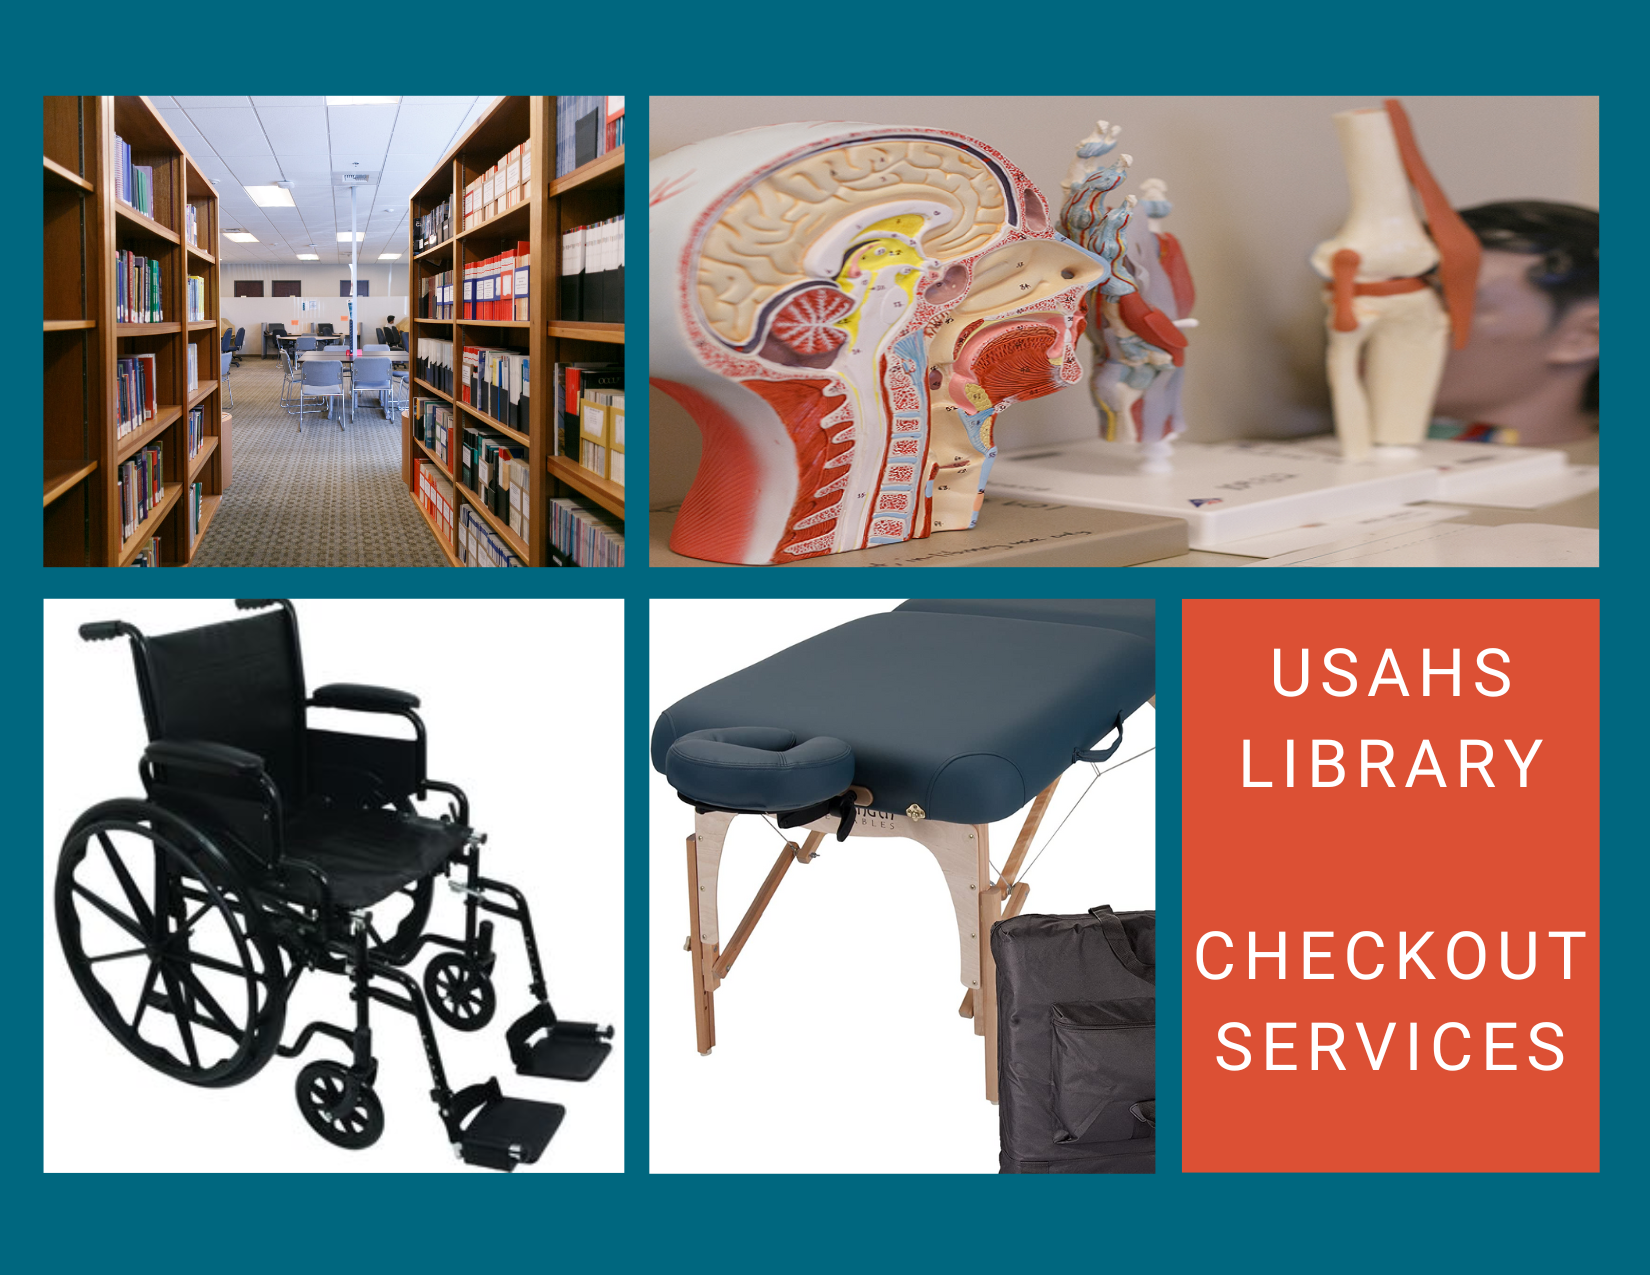 USAHS Library Checkout Services